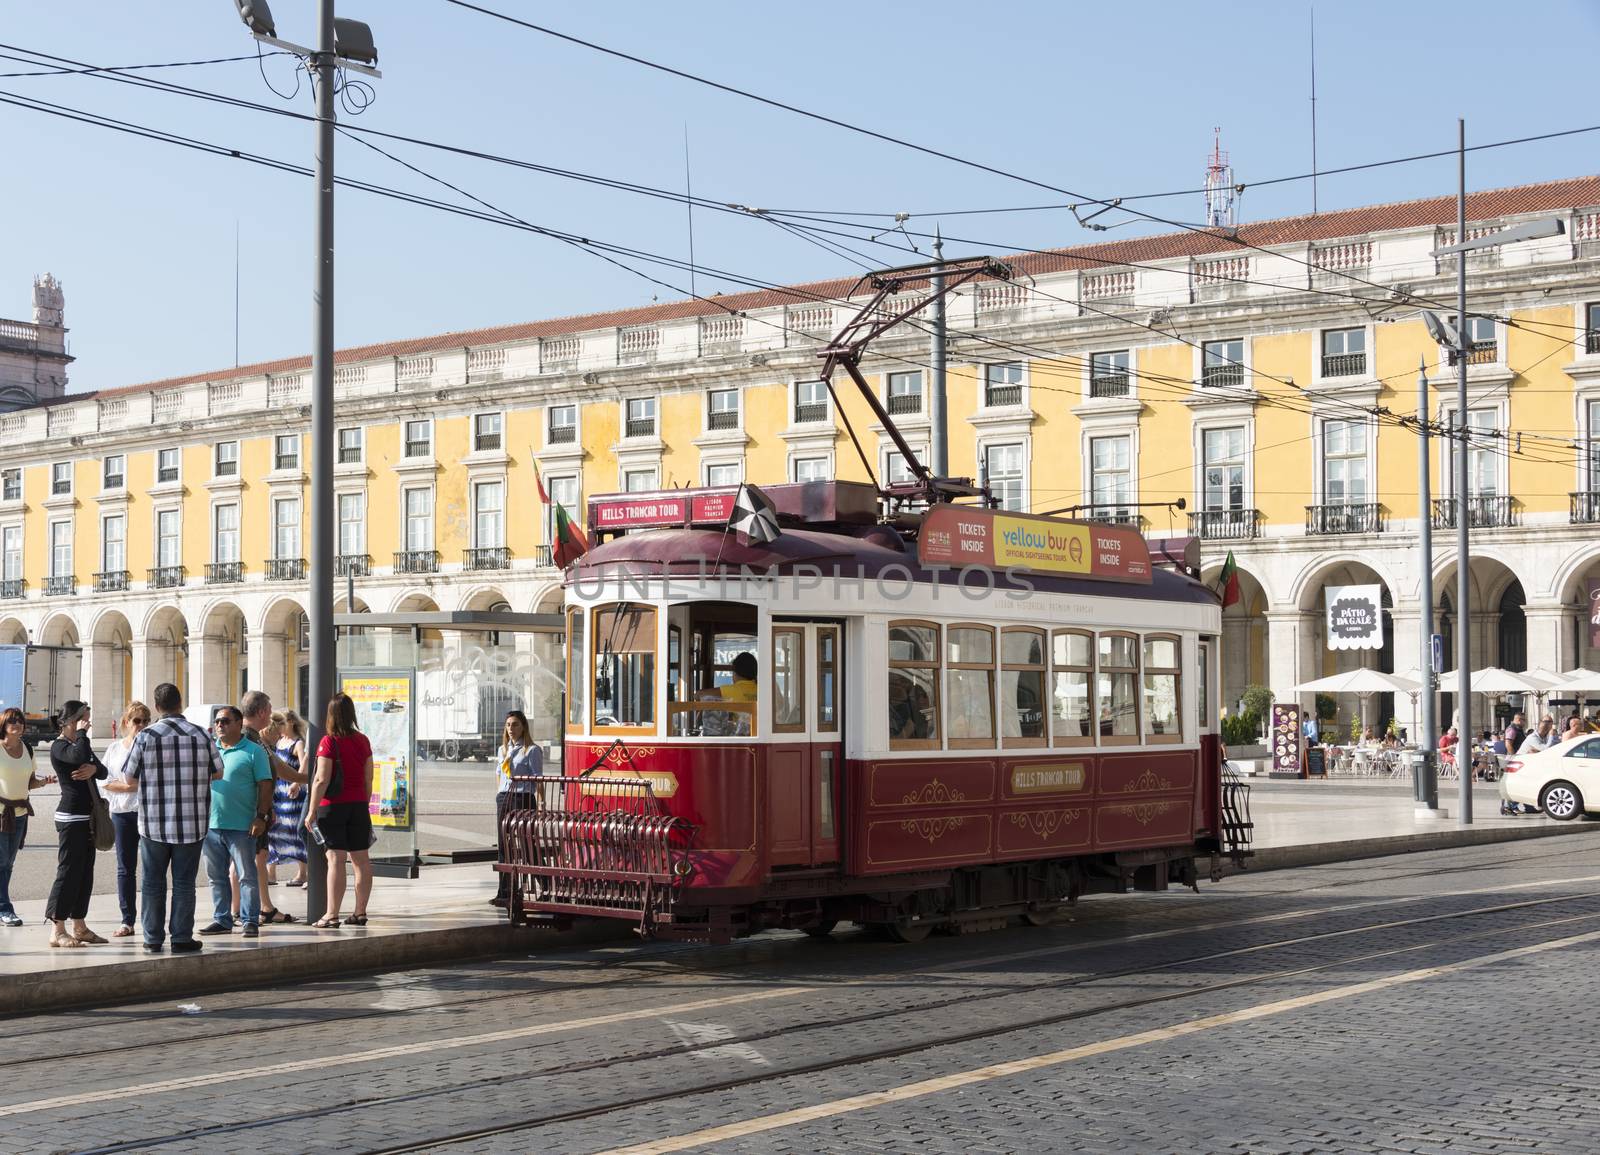 LISBON, PORTUGAL - SEPTEMBER 26: Unidentified people sitting in the red tram  goes by the street of Lisbon city center on September 26, 2015. Lisbon is a capital and must famous city of Portugal